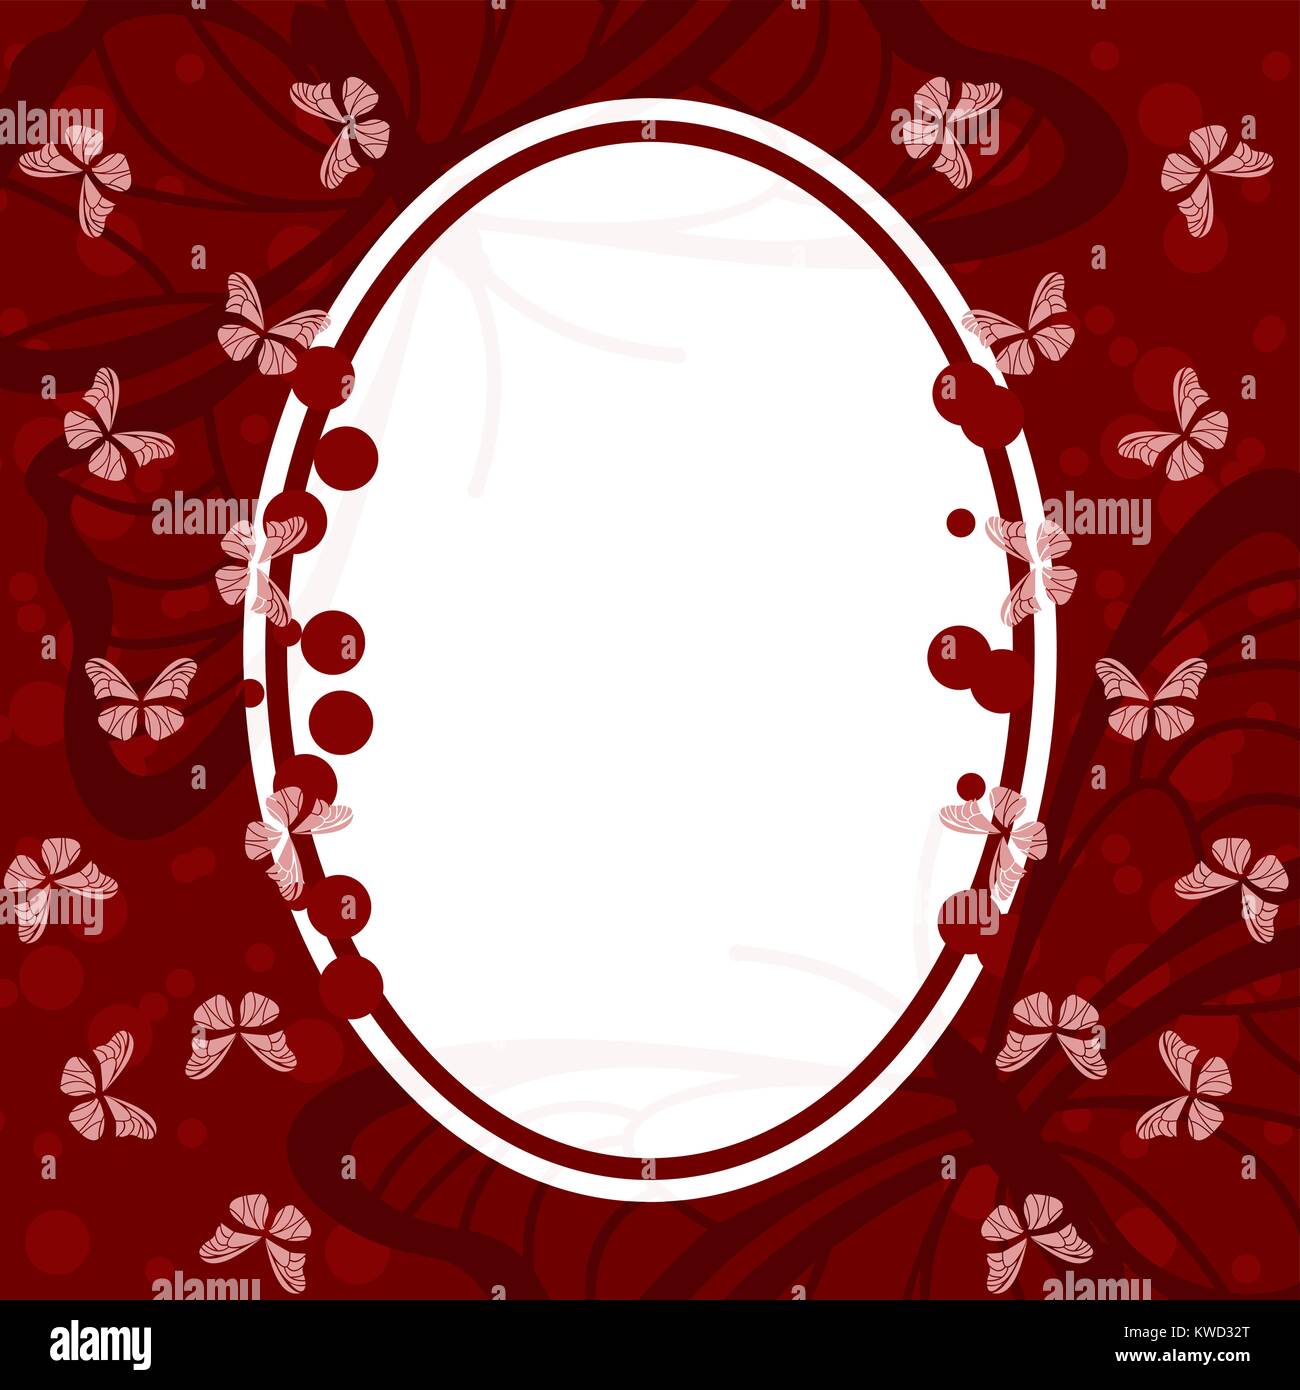 White oval on red background with butterflies Stock Vector